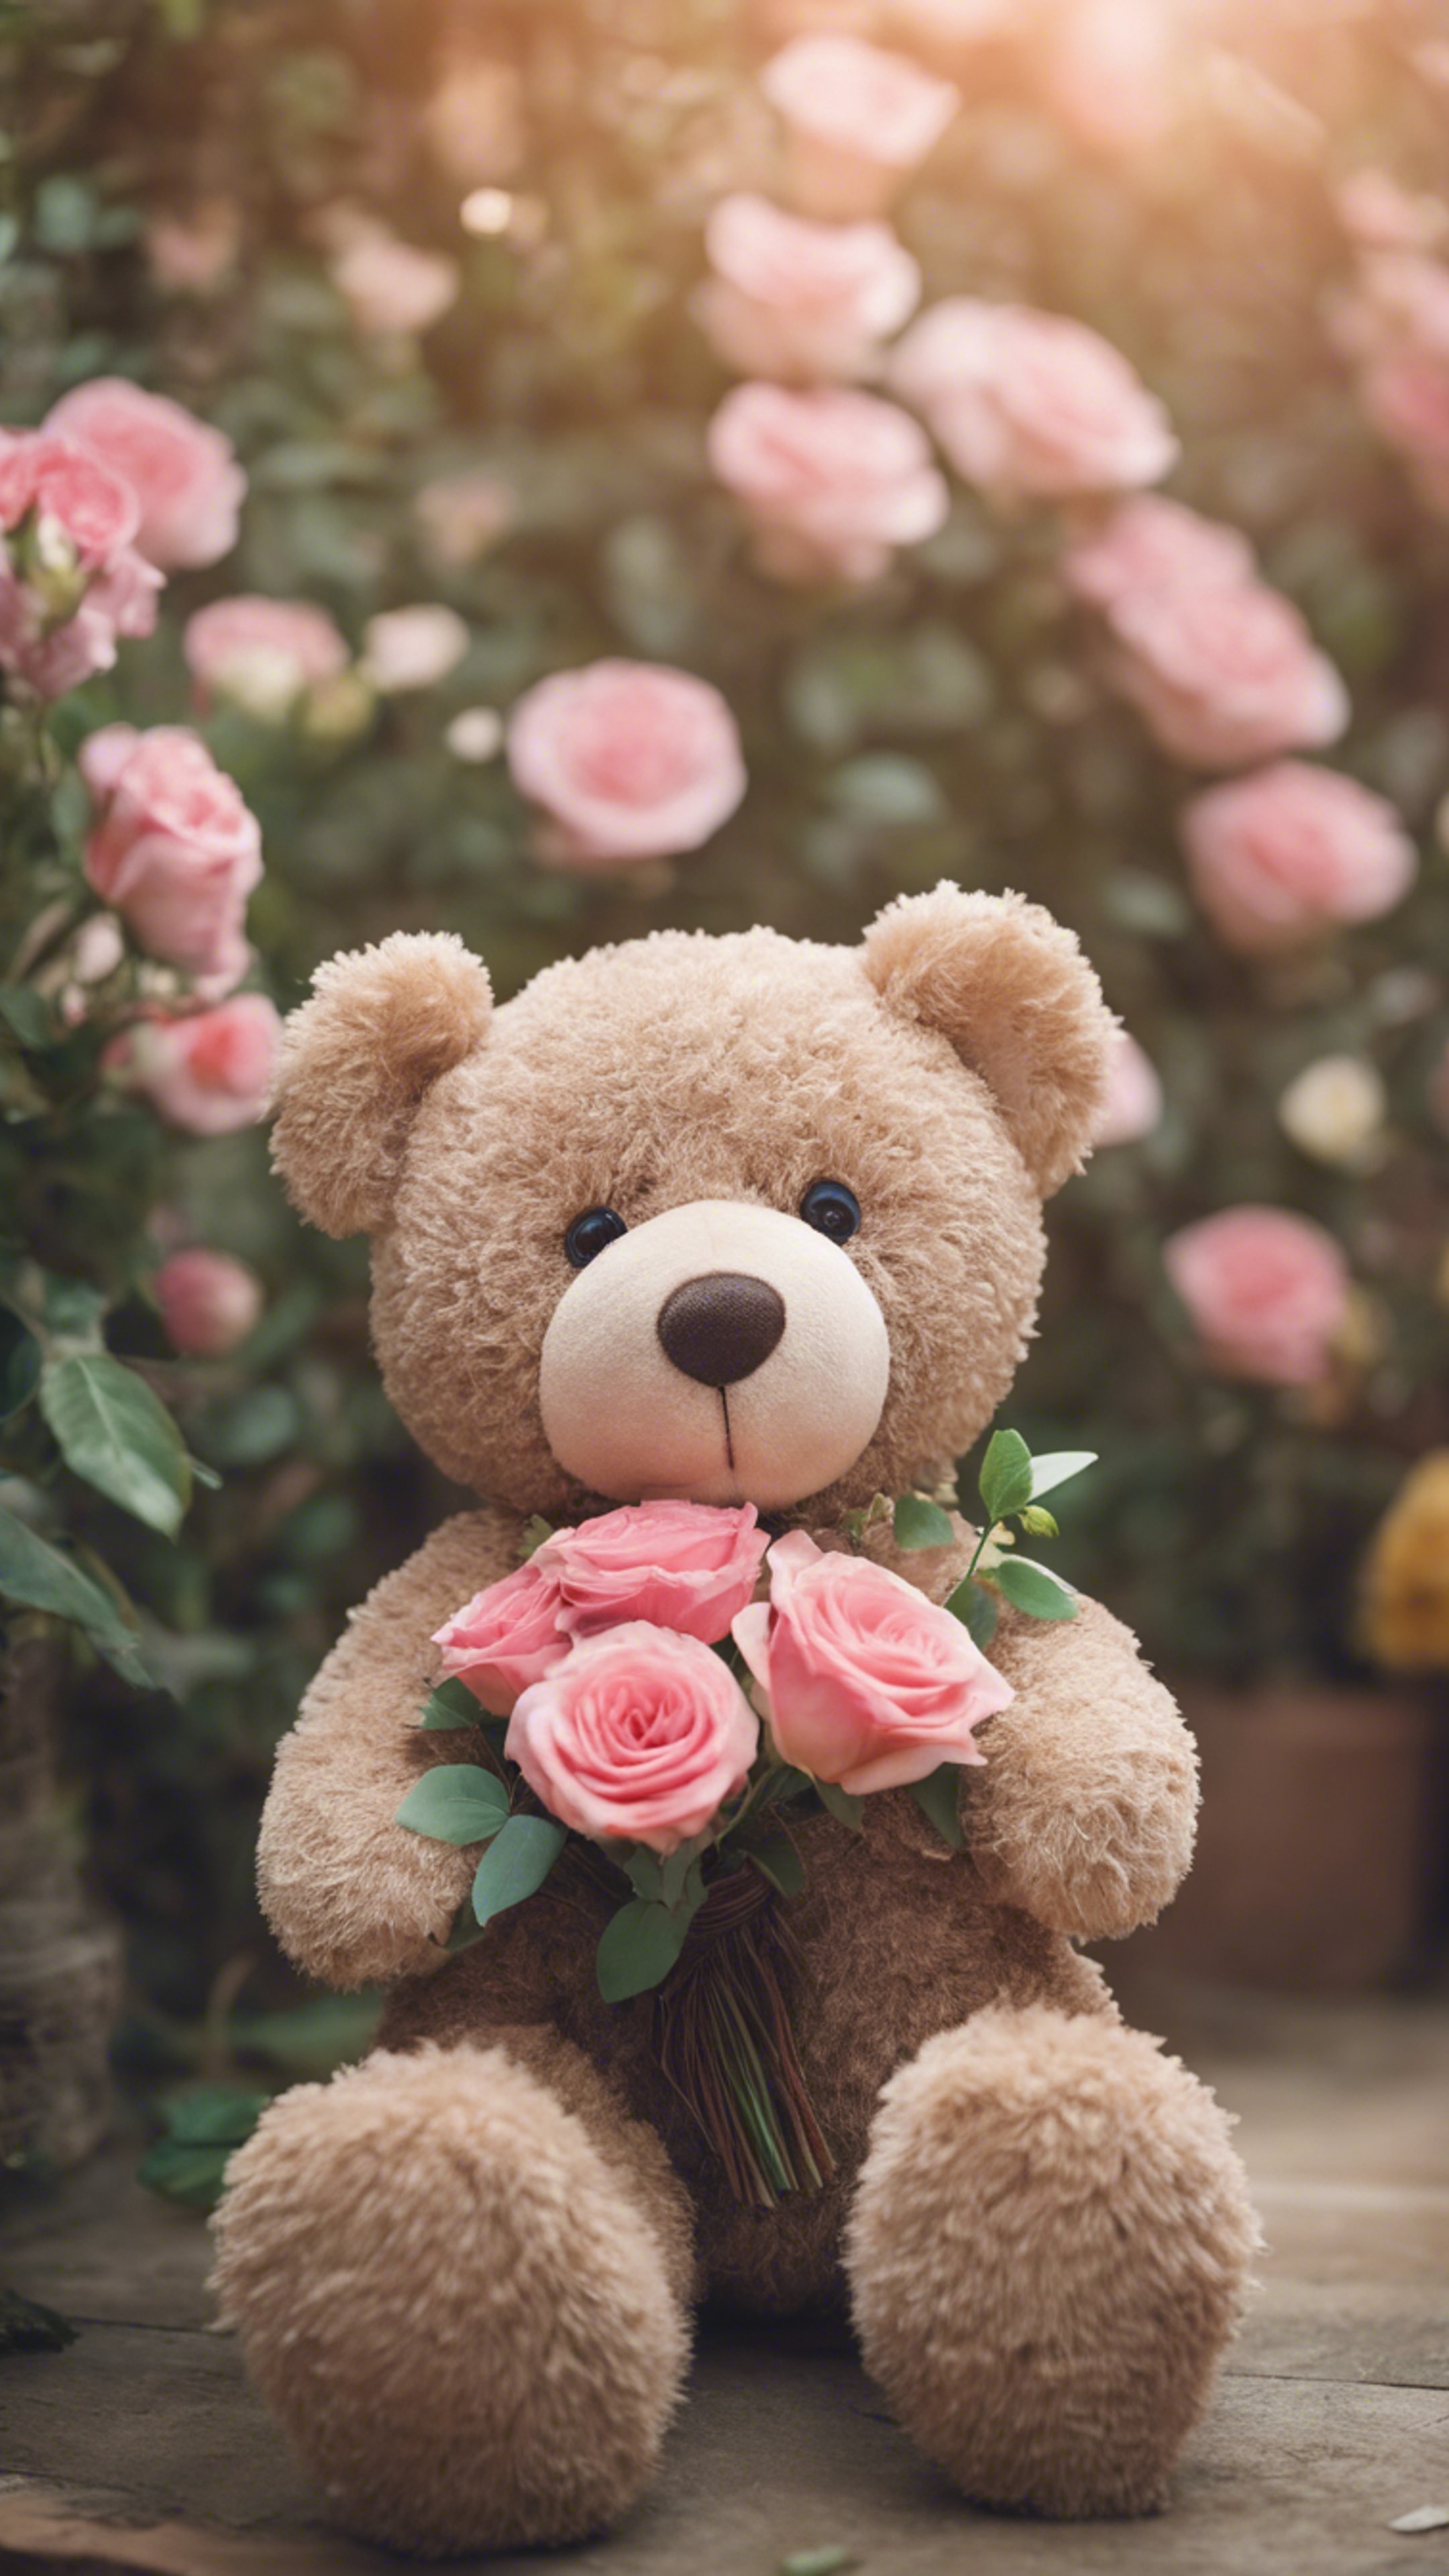 A teddy bear in a romantic setting, holding a bouquet of roses. 牆紙[0c0a94ba405548b0bff3]